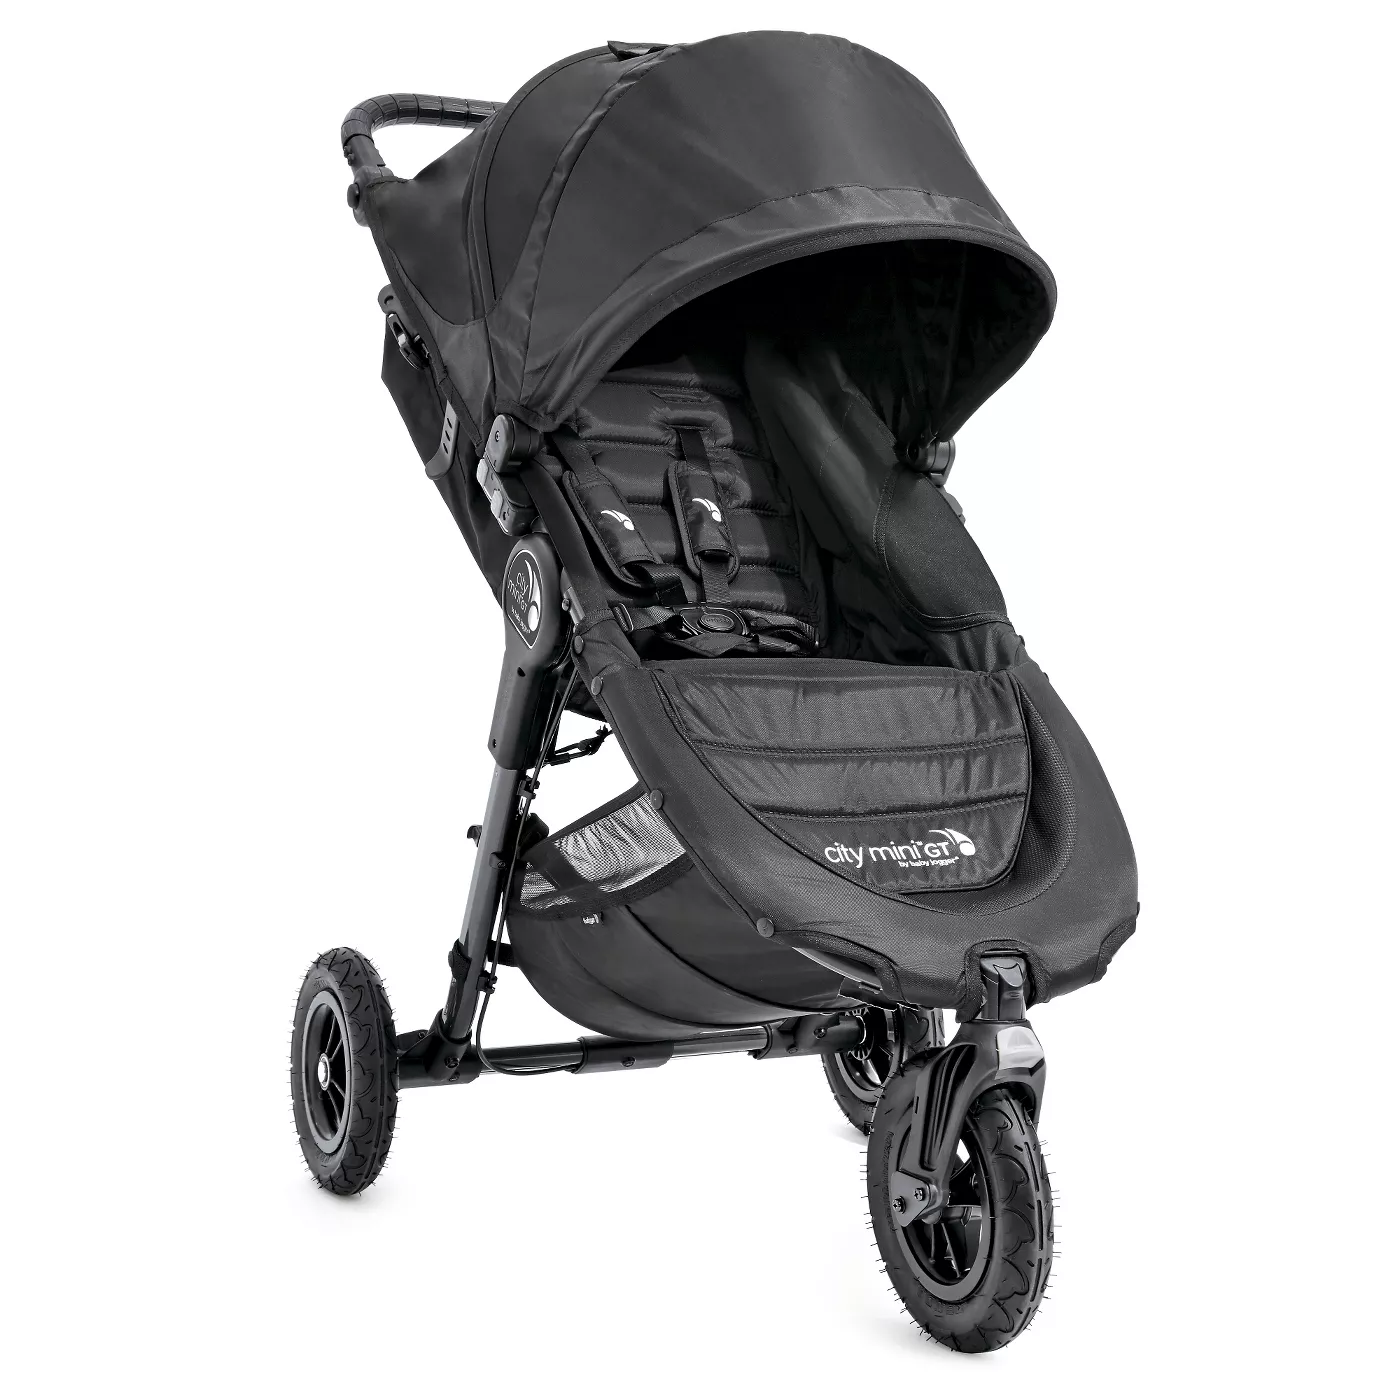 The Baby Jogger City Mini GT Single Stroller travel product recommended by Liz Jeneault on Lifney.